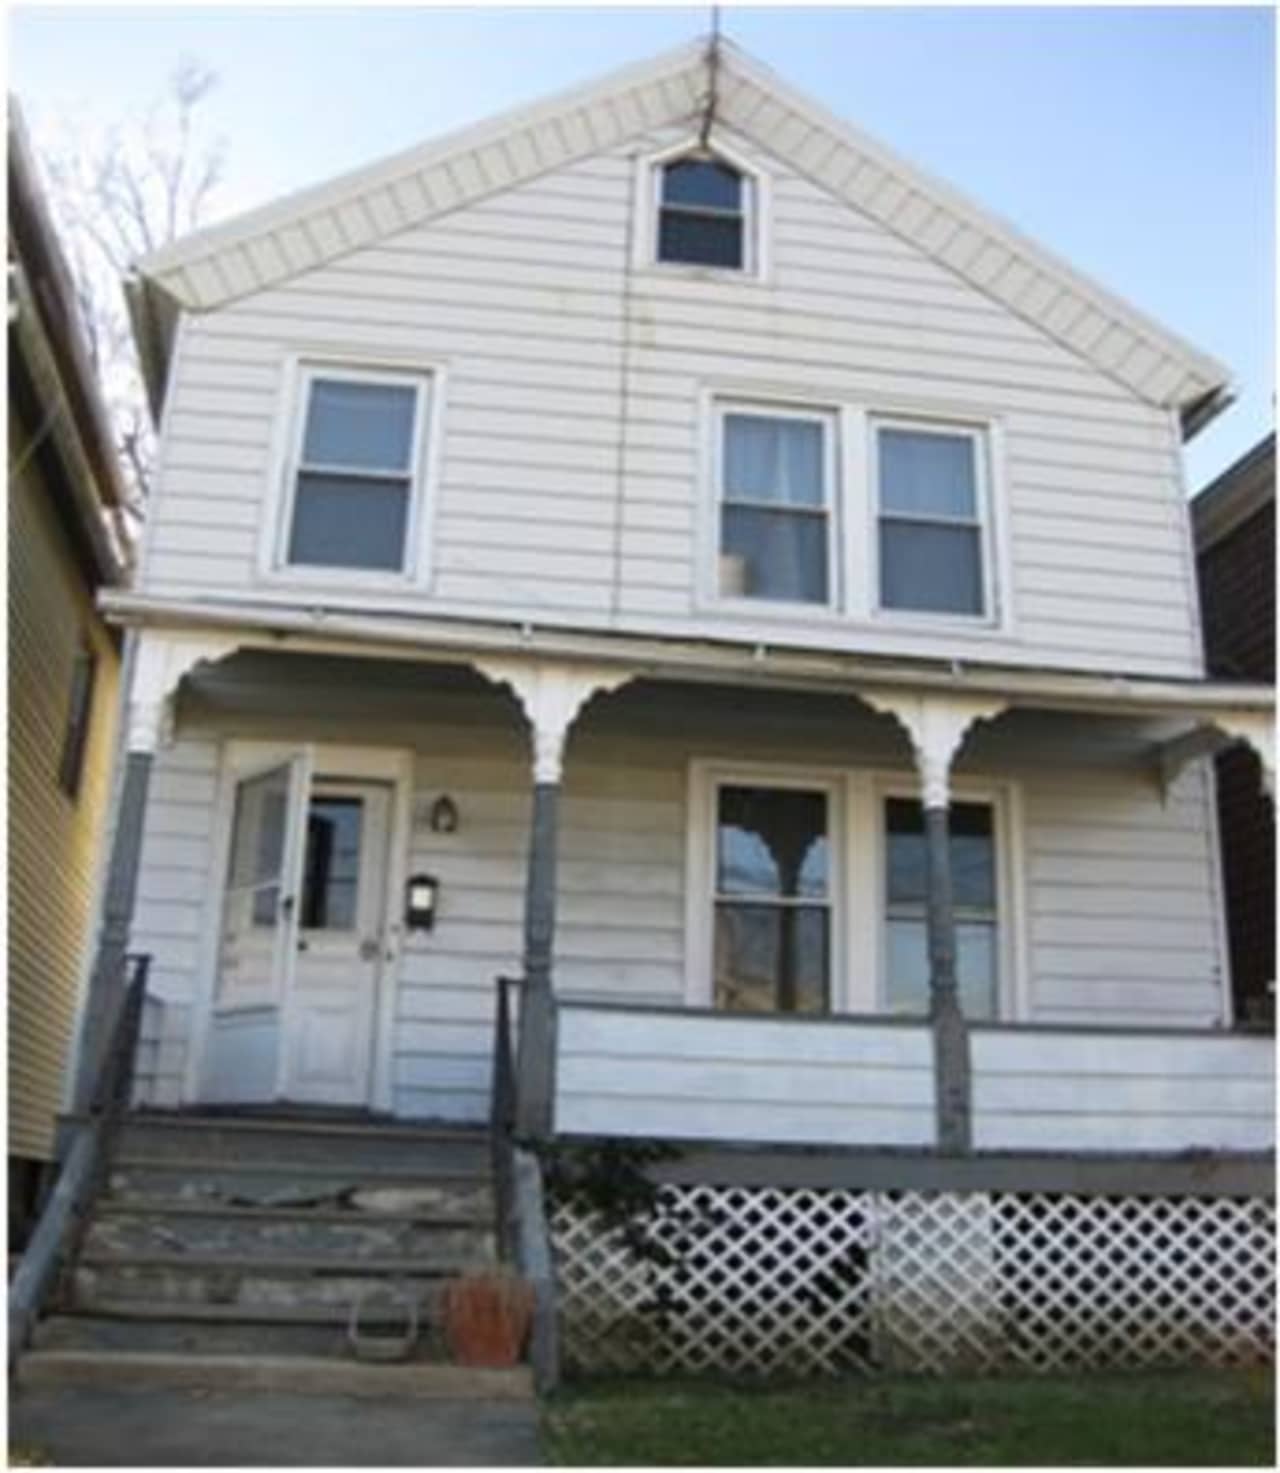 This house at 94 State St., Ossining, will be available at the auction.